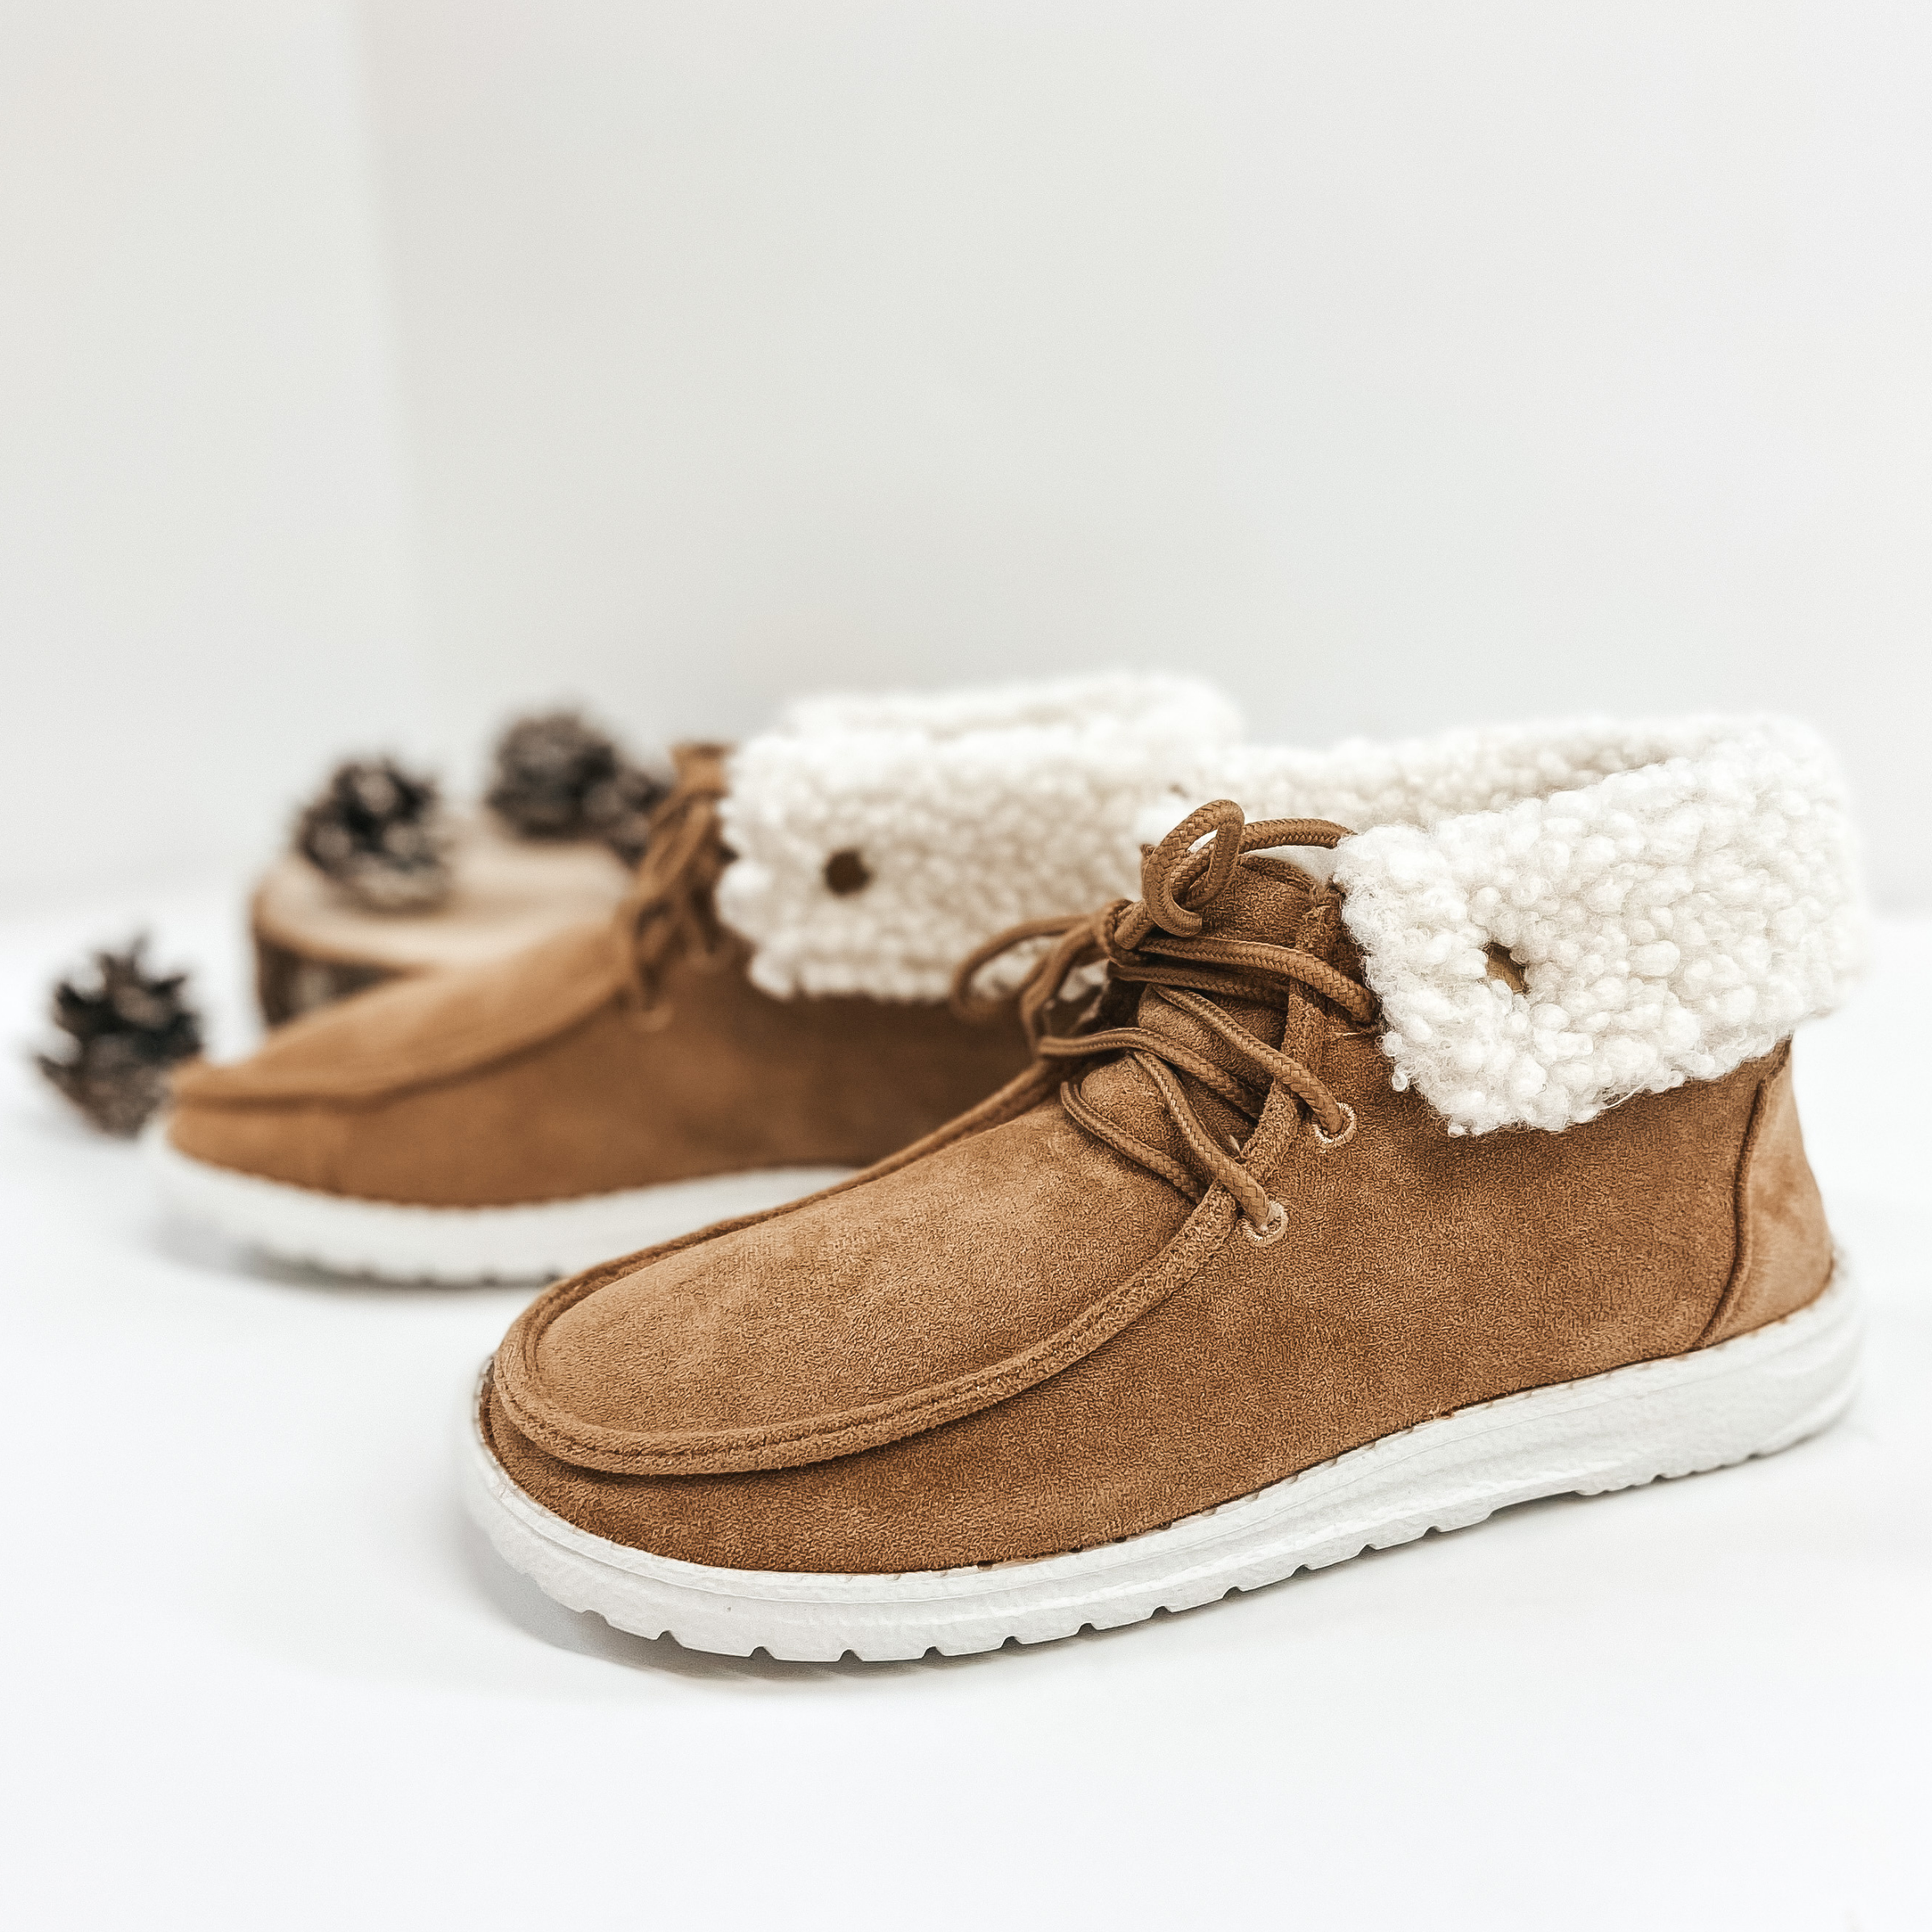 Fleace lined high top sneakers that are a soft tan. Pictured on white backgroynd with pinecones.